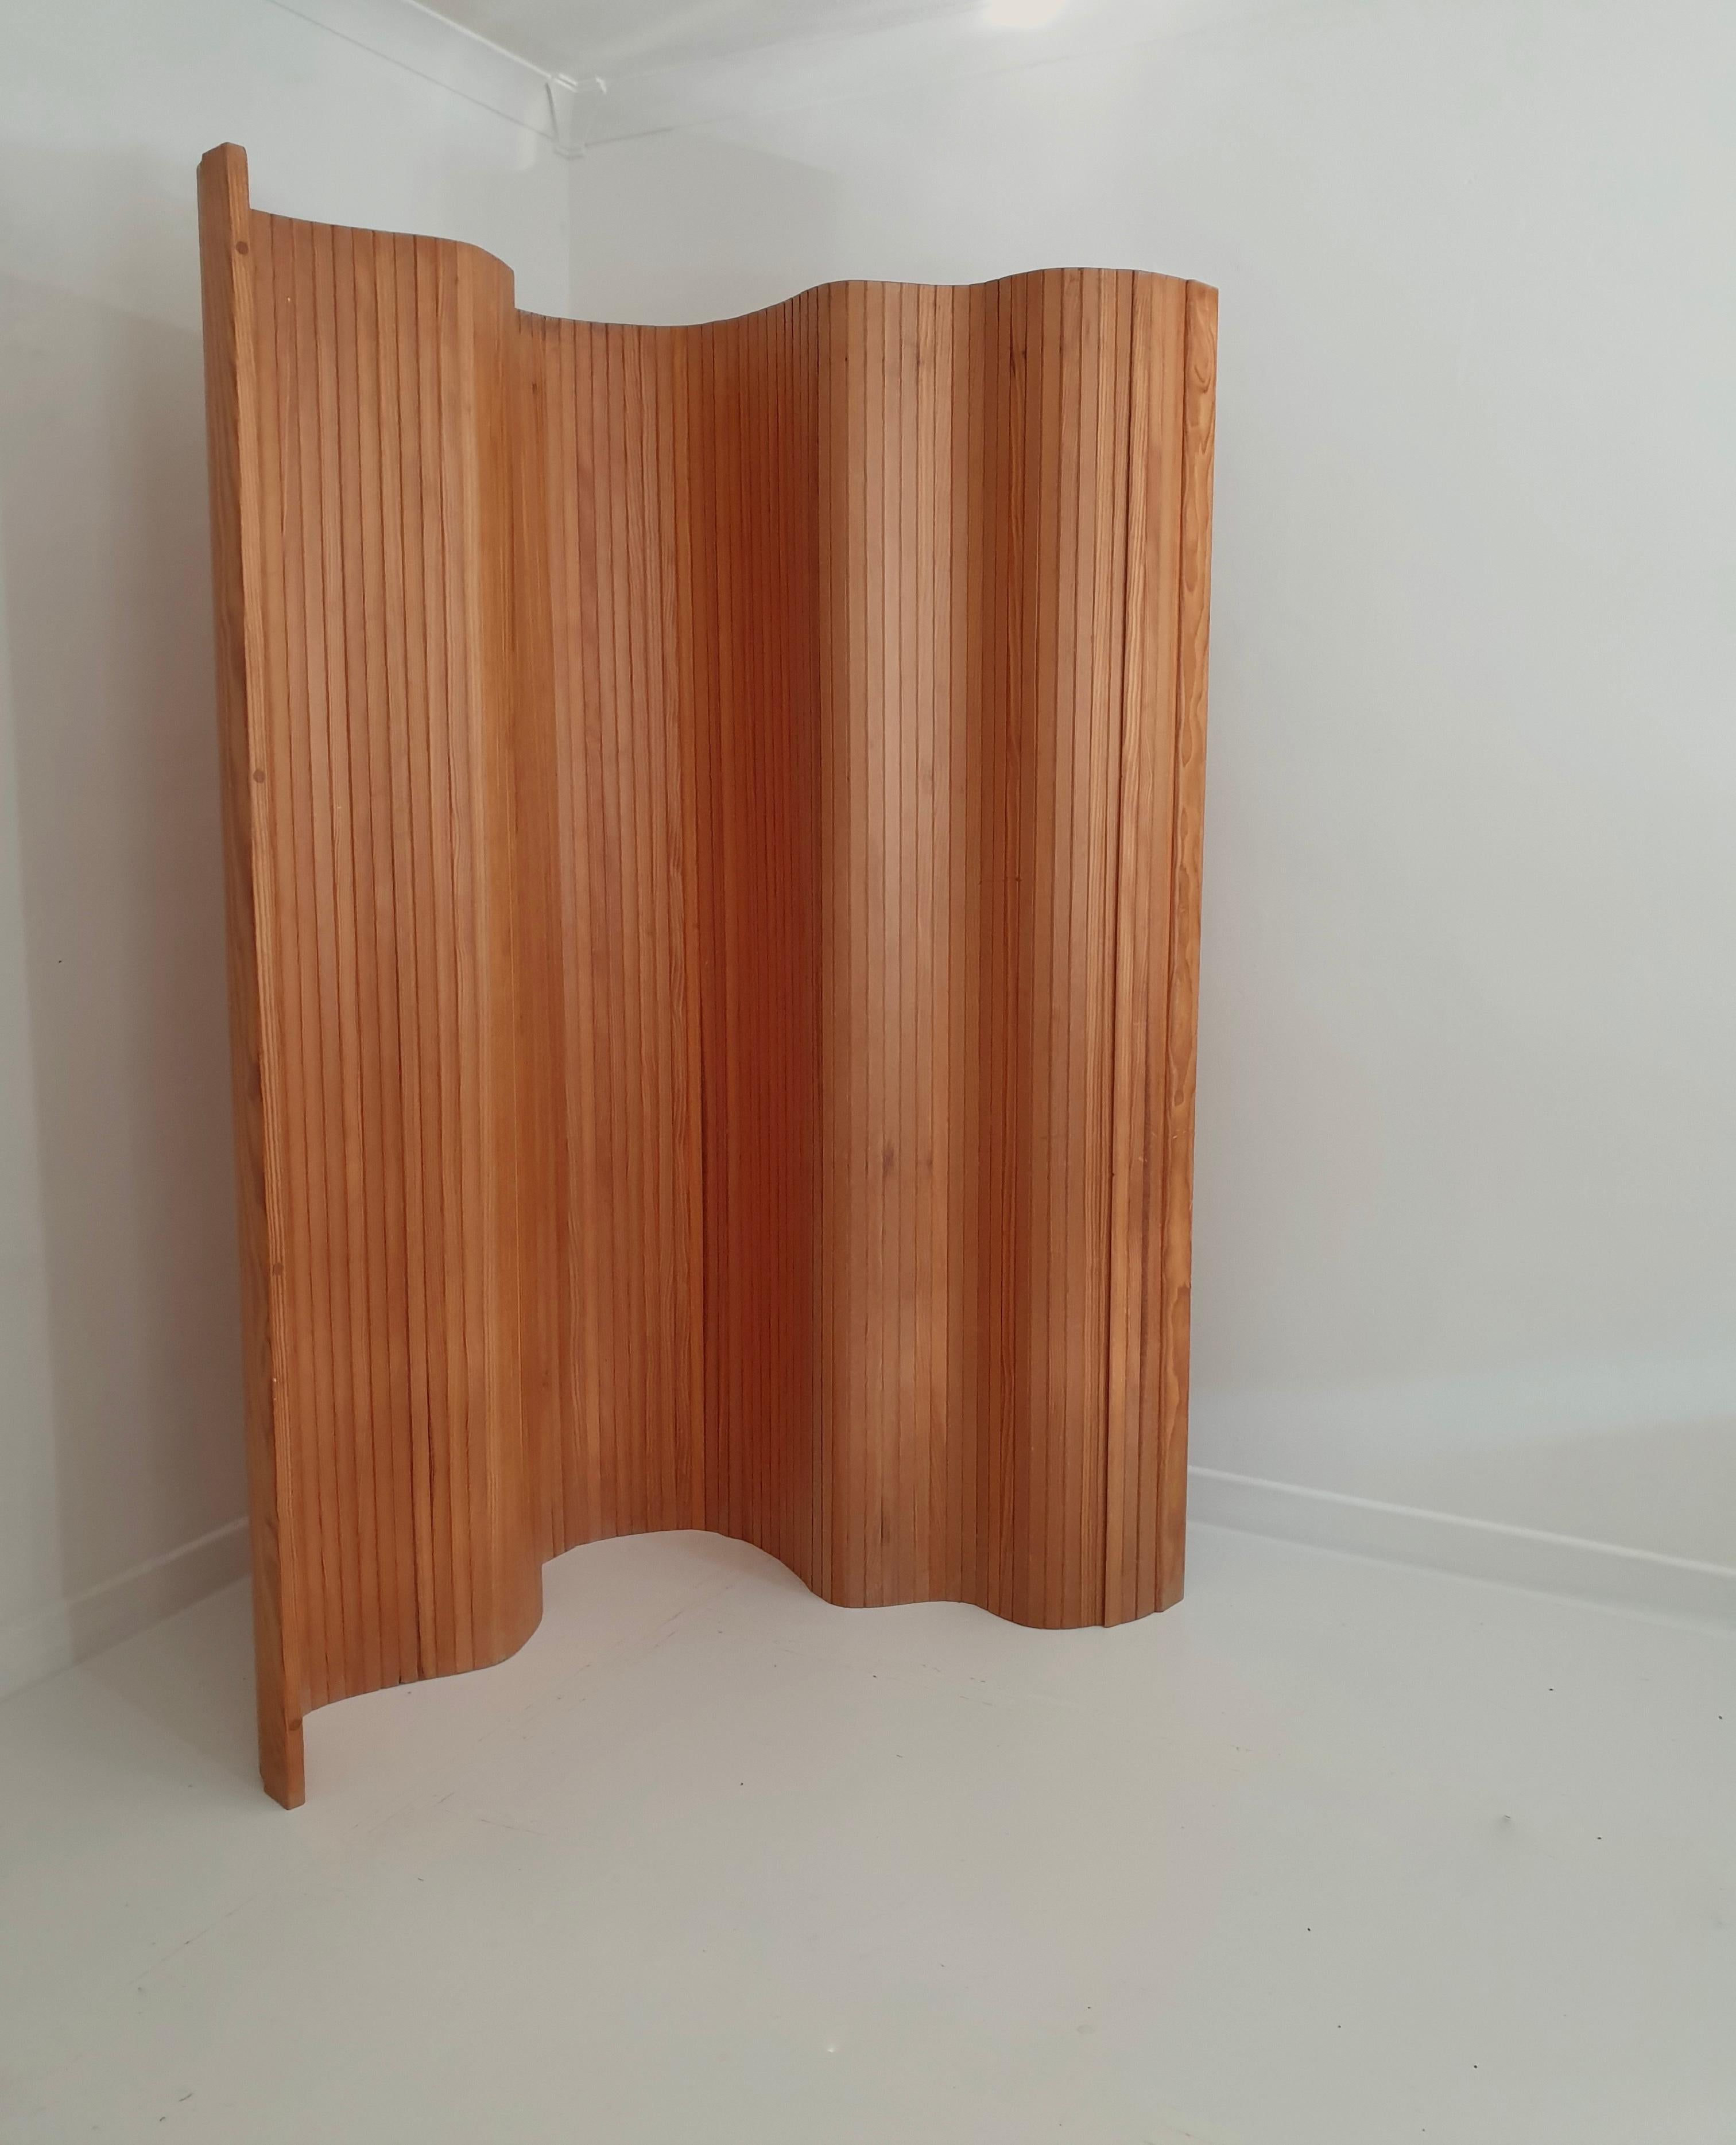 20th Century Pine Tambour Room Divider / Screen in the Manner of Aalto by Habitat, circa 1980